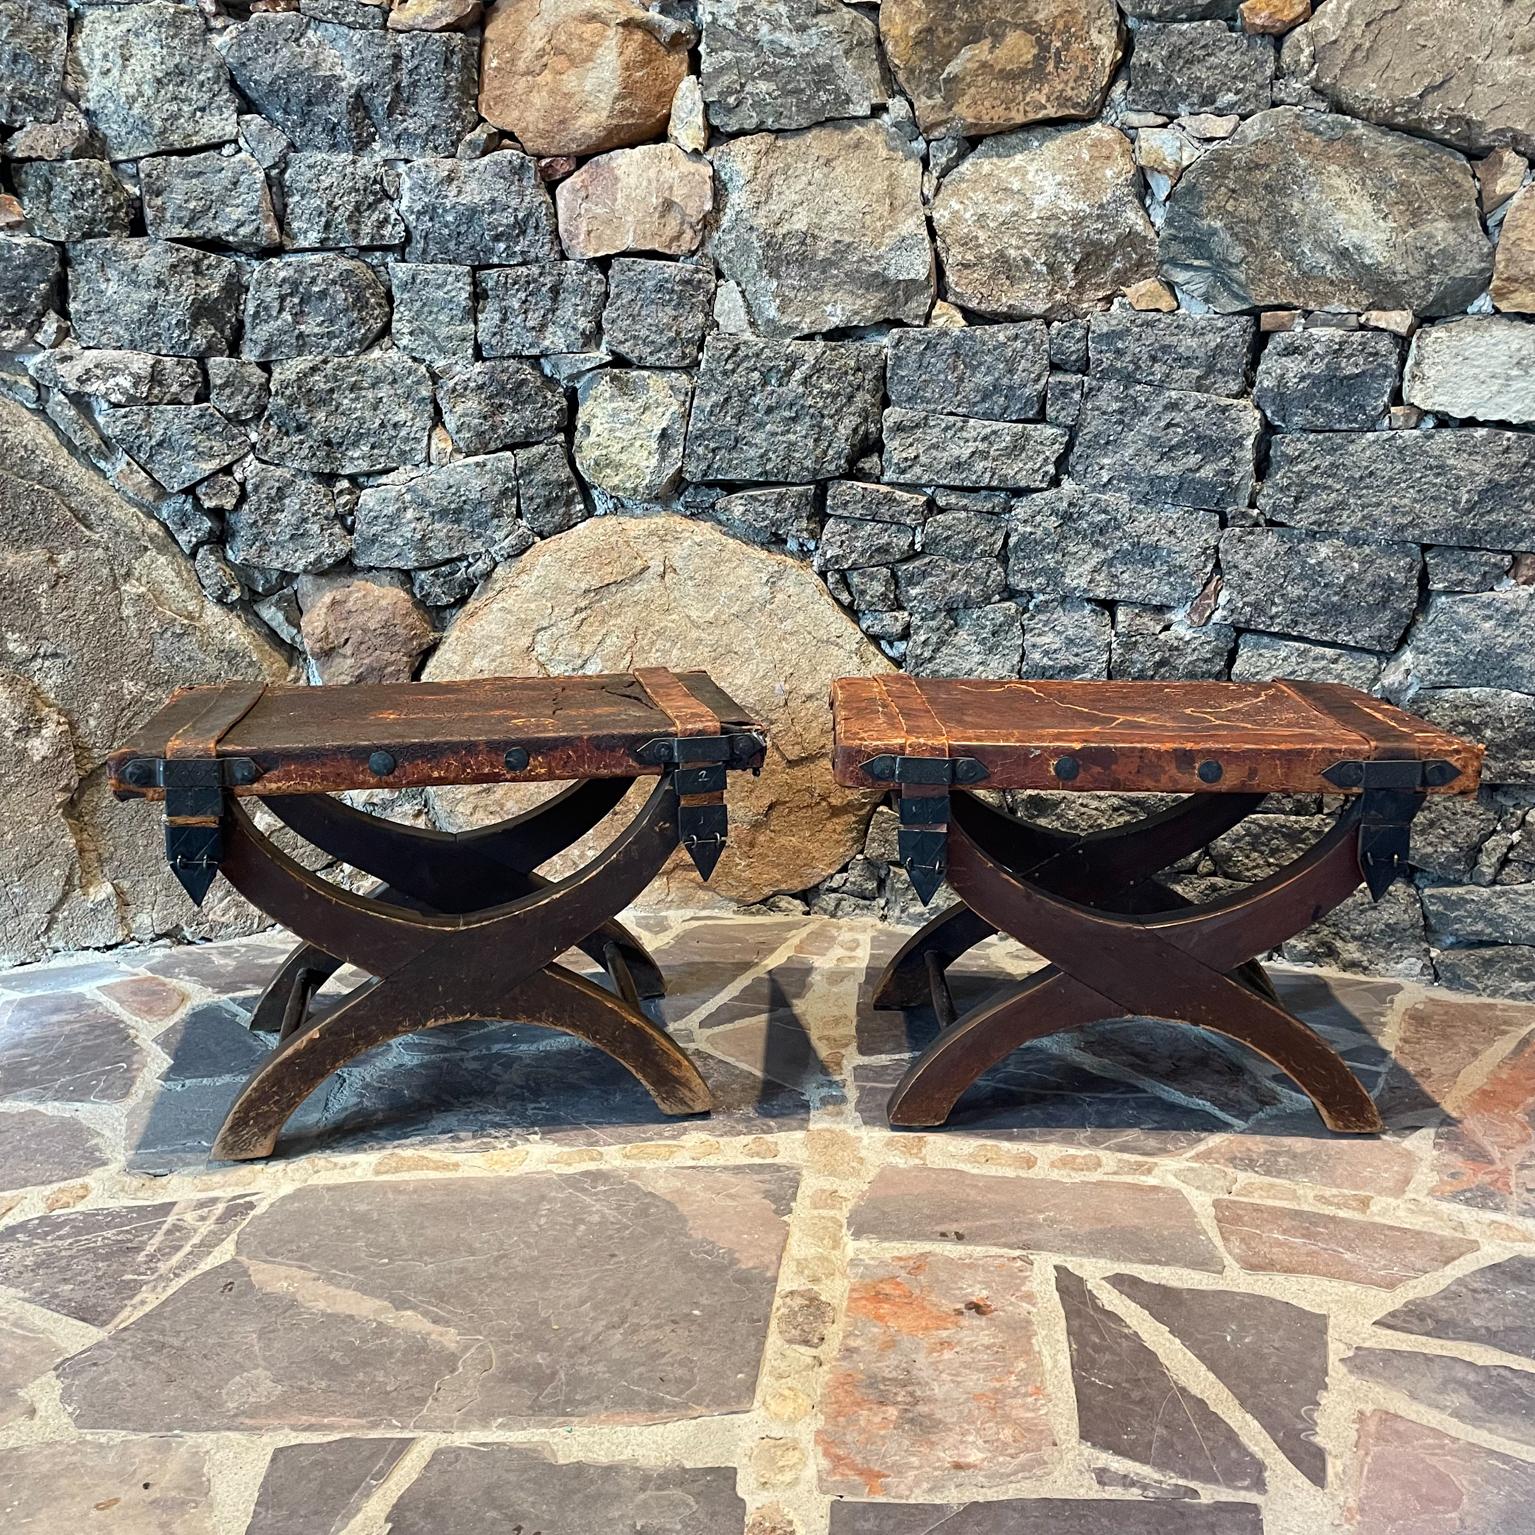 Miguelito stools
1940s Leather Miguelito Stools Rustic Hand forged Iron Hardware Spanish Colonial Mexico
16.5 tall x 24.25 w x 15.25 d
Pair of wood & leather stools with hand forged ornamentation. Wood is firm and strong. Original leather is